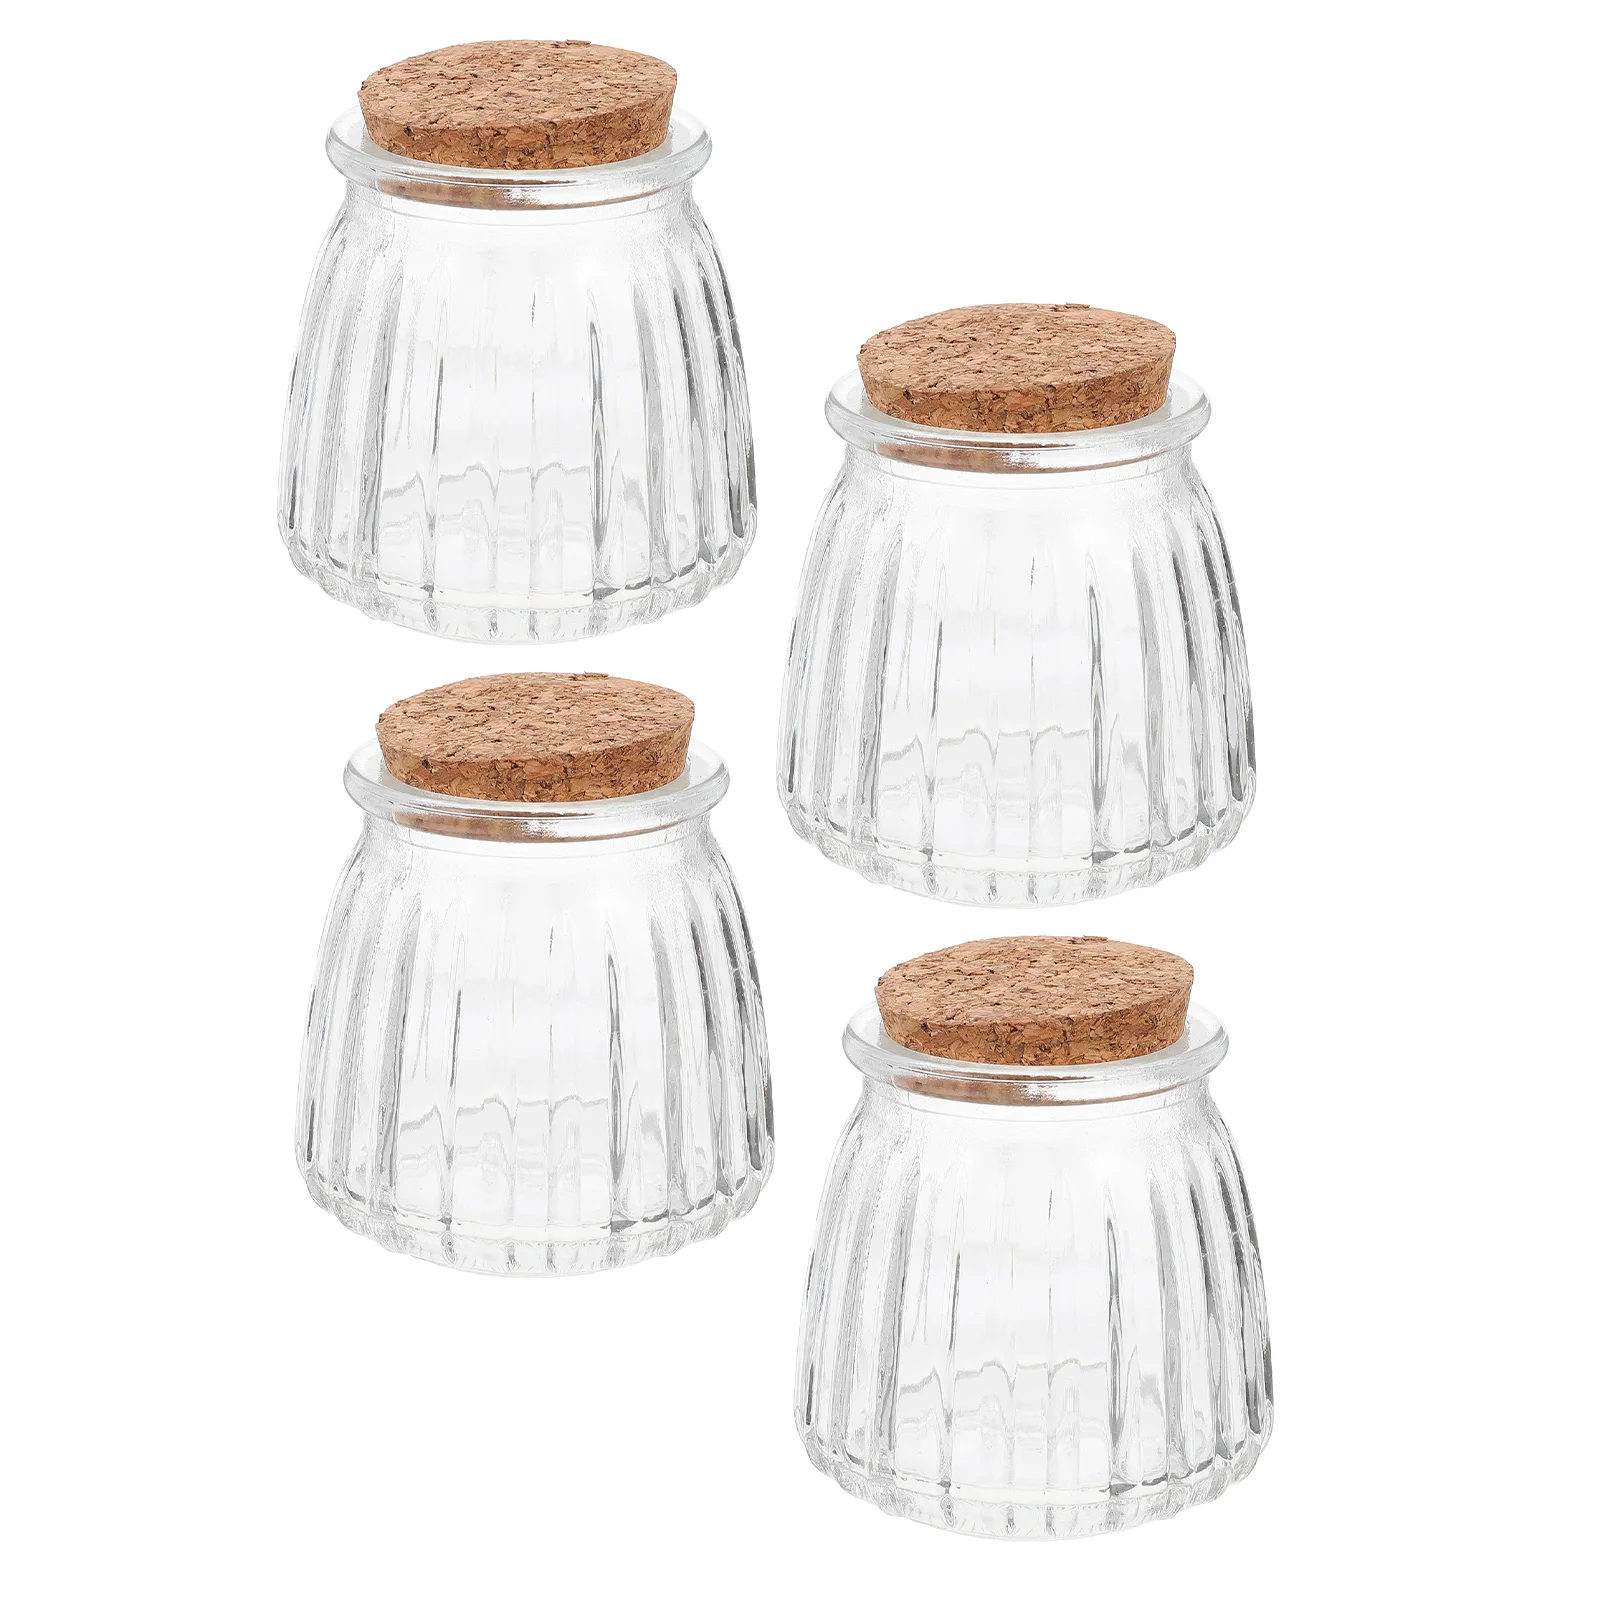 

Jars Bottle Cork Bottles Jar Vials Mini Containers Storage Favor Tiny Lids Transparent Perfume Stopper Drifting Corked Container